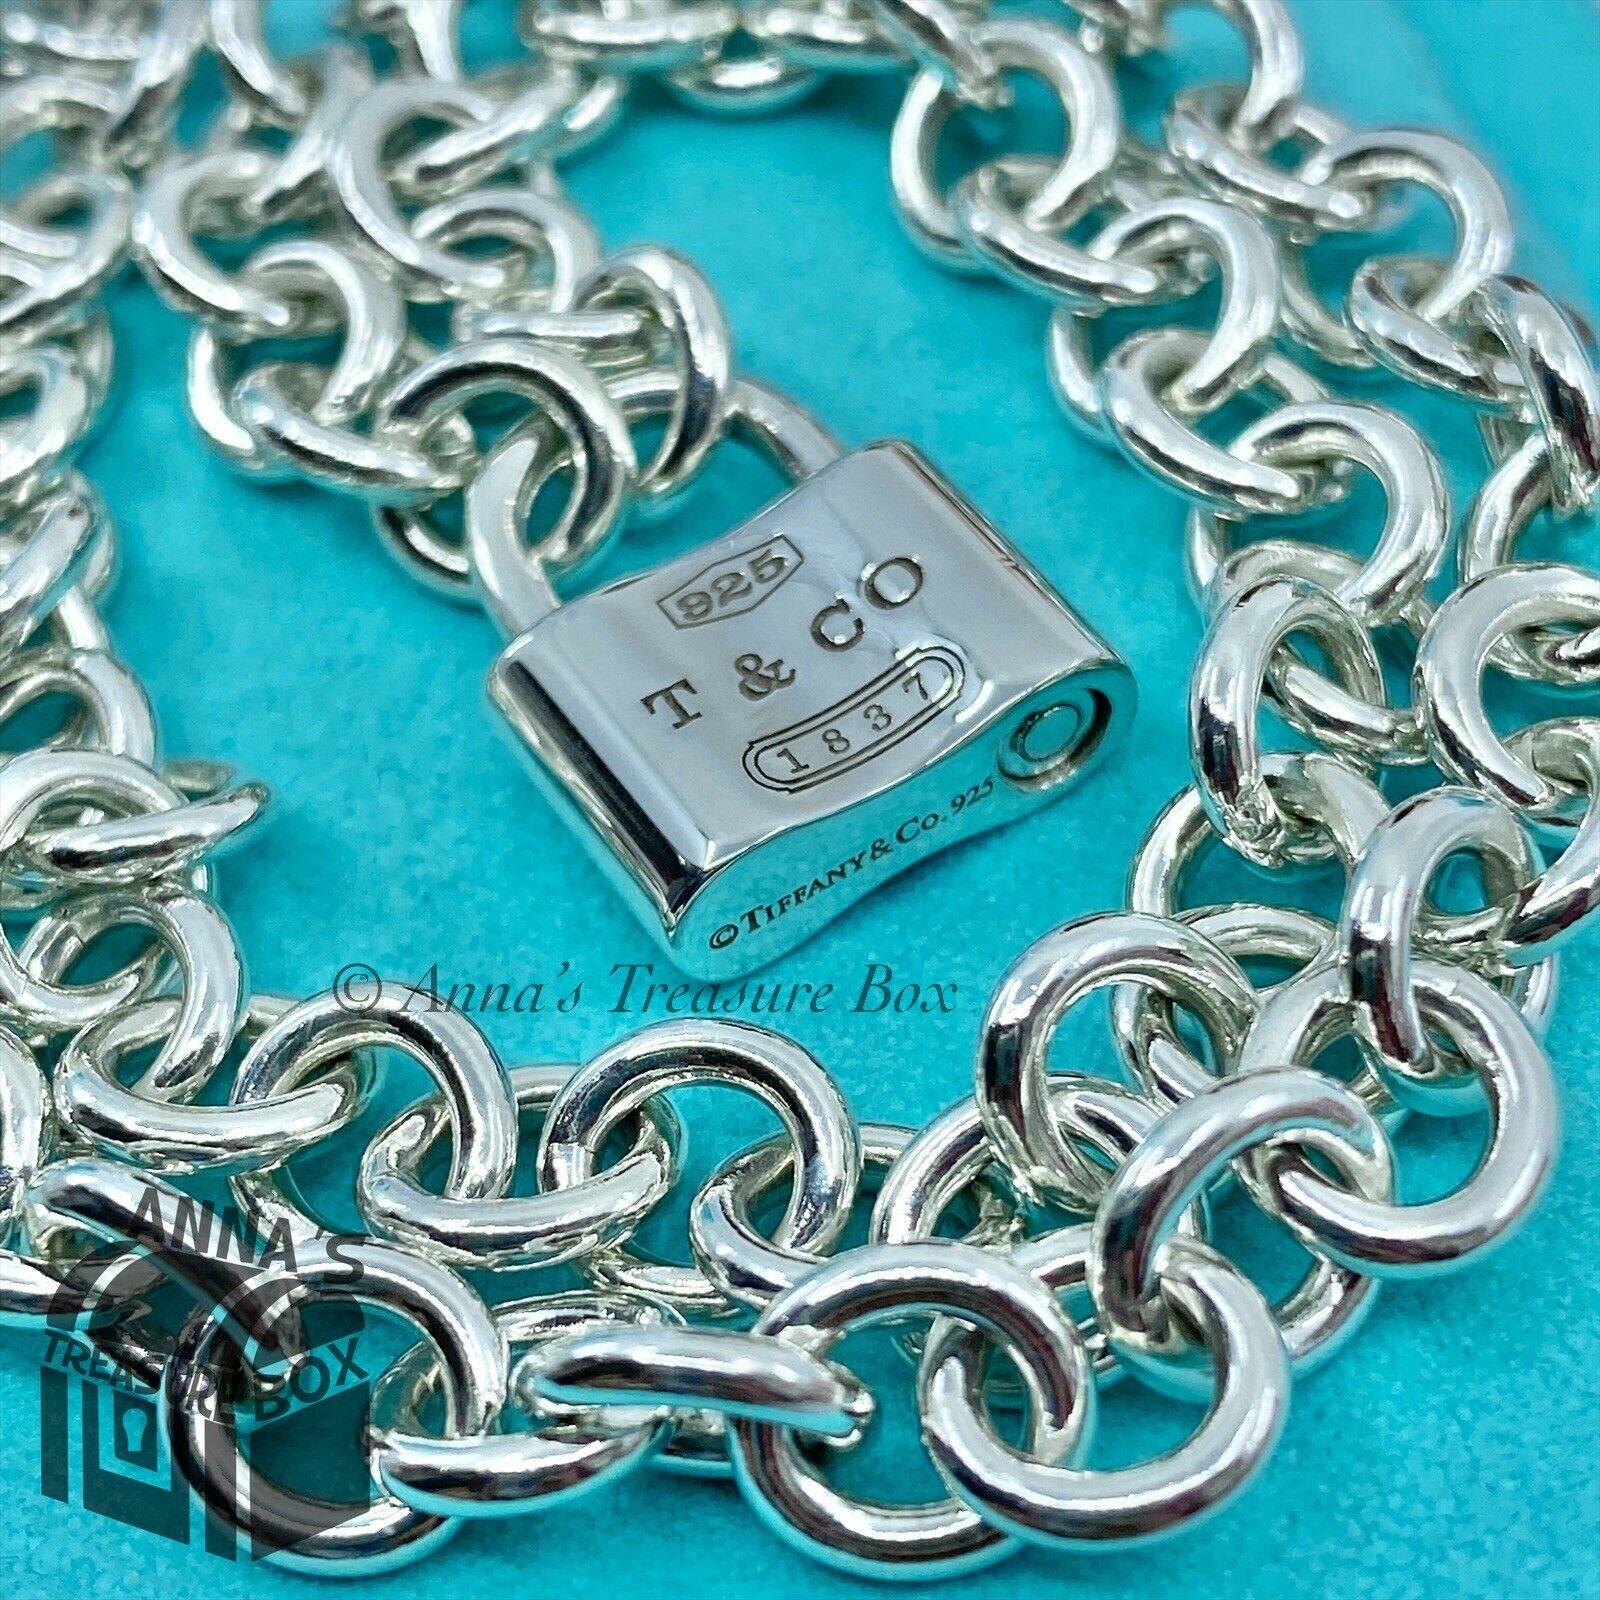 Tiffany & Co. Sterling Silver Padlock Link Necklace